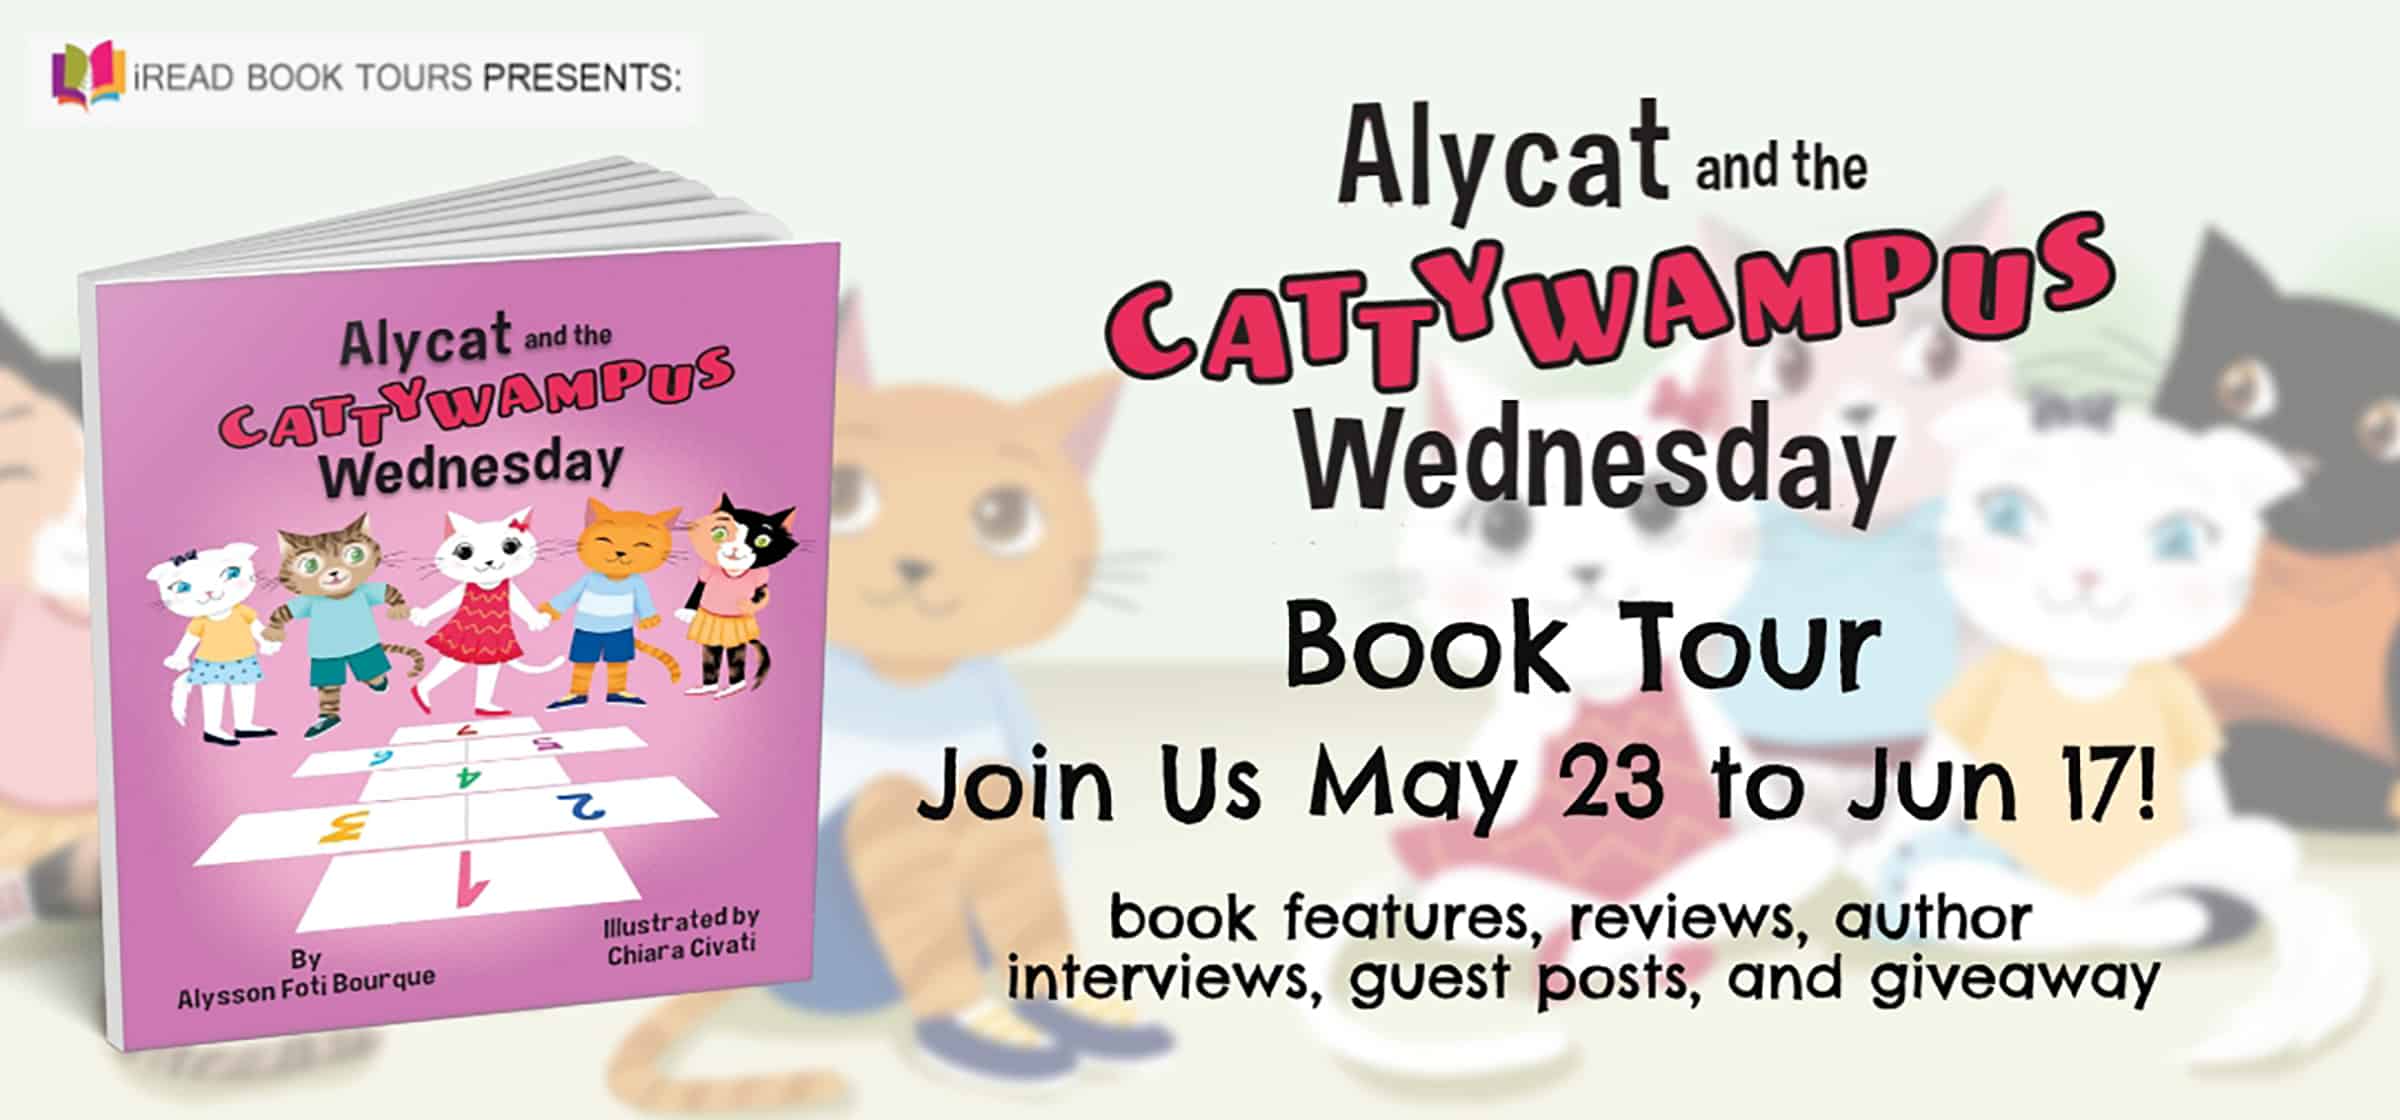 Alycat and the Cattywampus Wednesday by Alysson Foti Bourque | Giveaway Ends 6/24/22, Guest Post, & Review